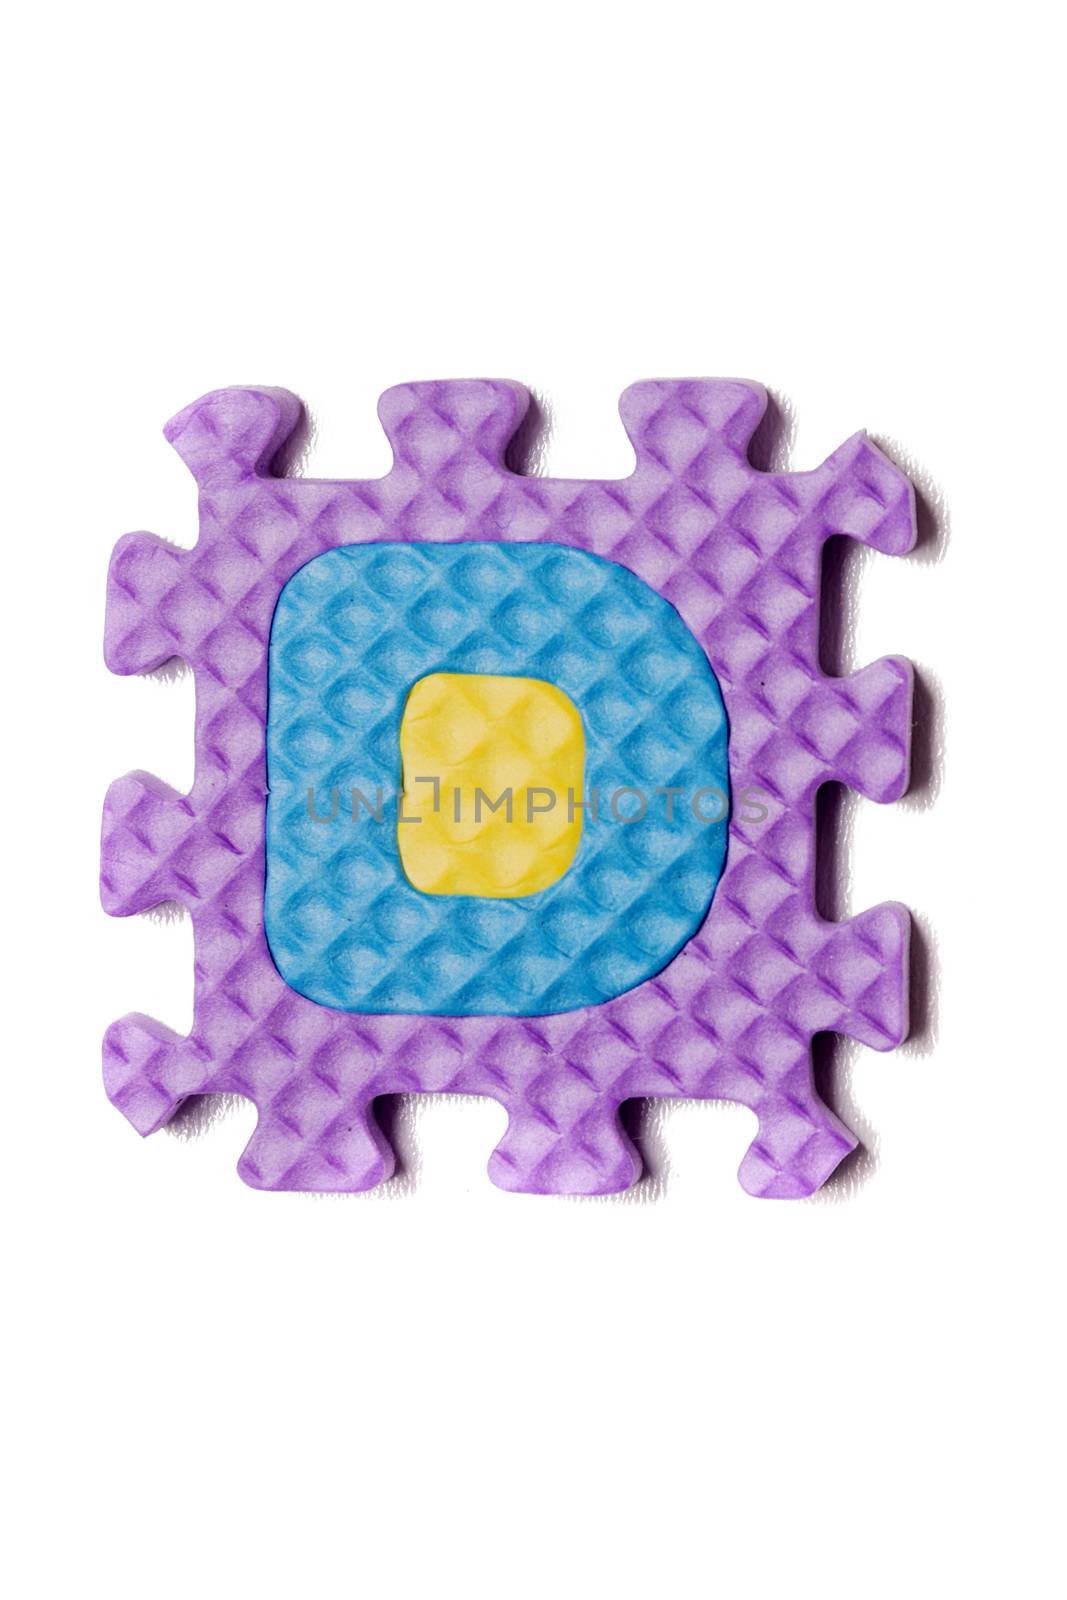 Foam puzzle letter uppercase isolated on a white background.